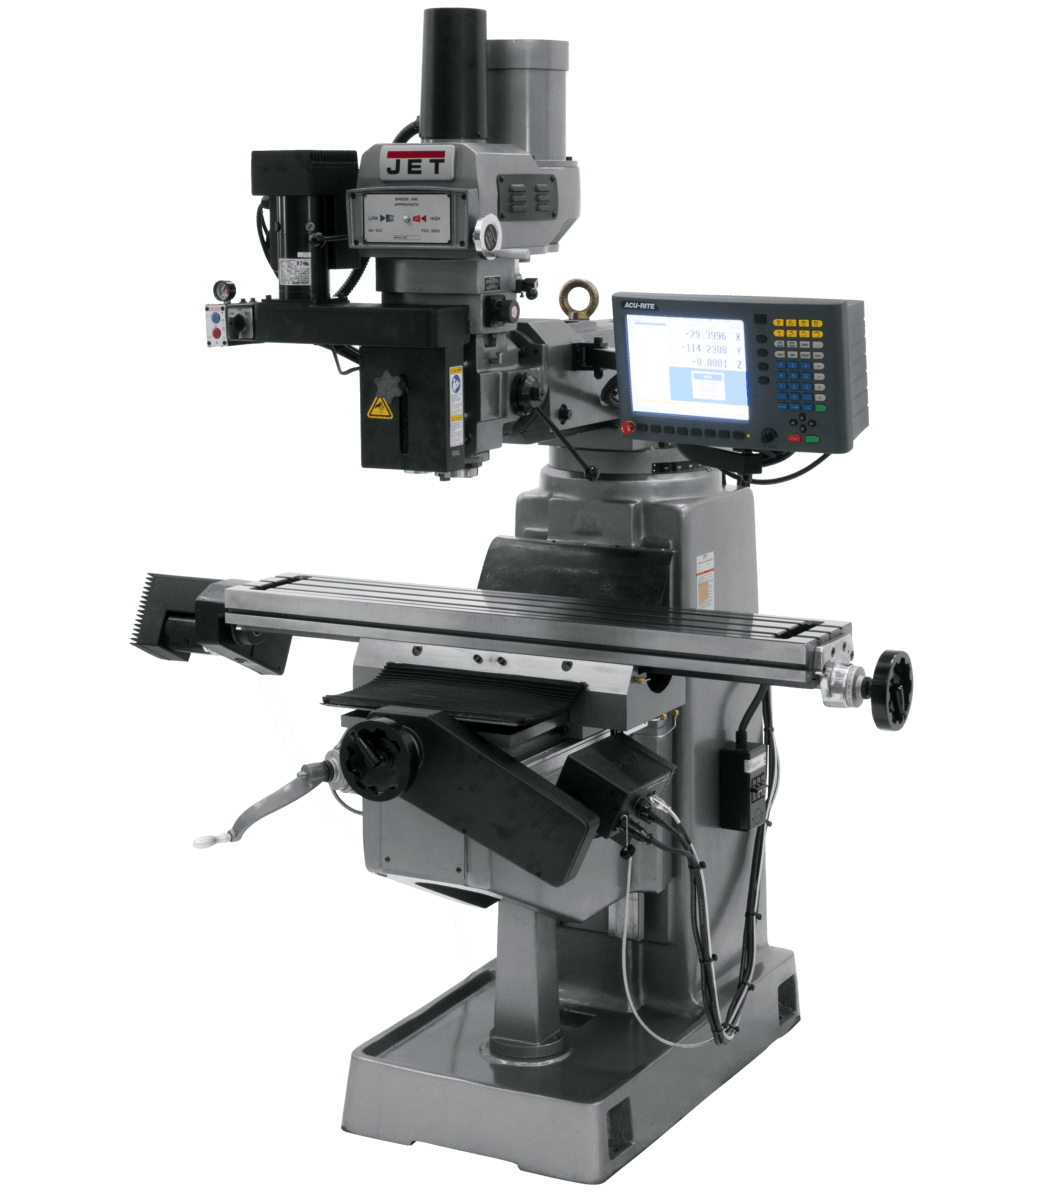 230 Mill With 2-Axis Acu-Rite MilPwr G2 CNC Controller - Jet